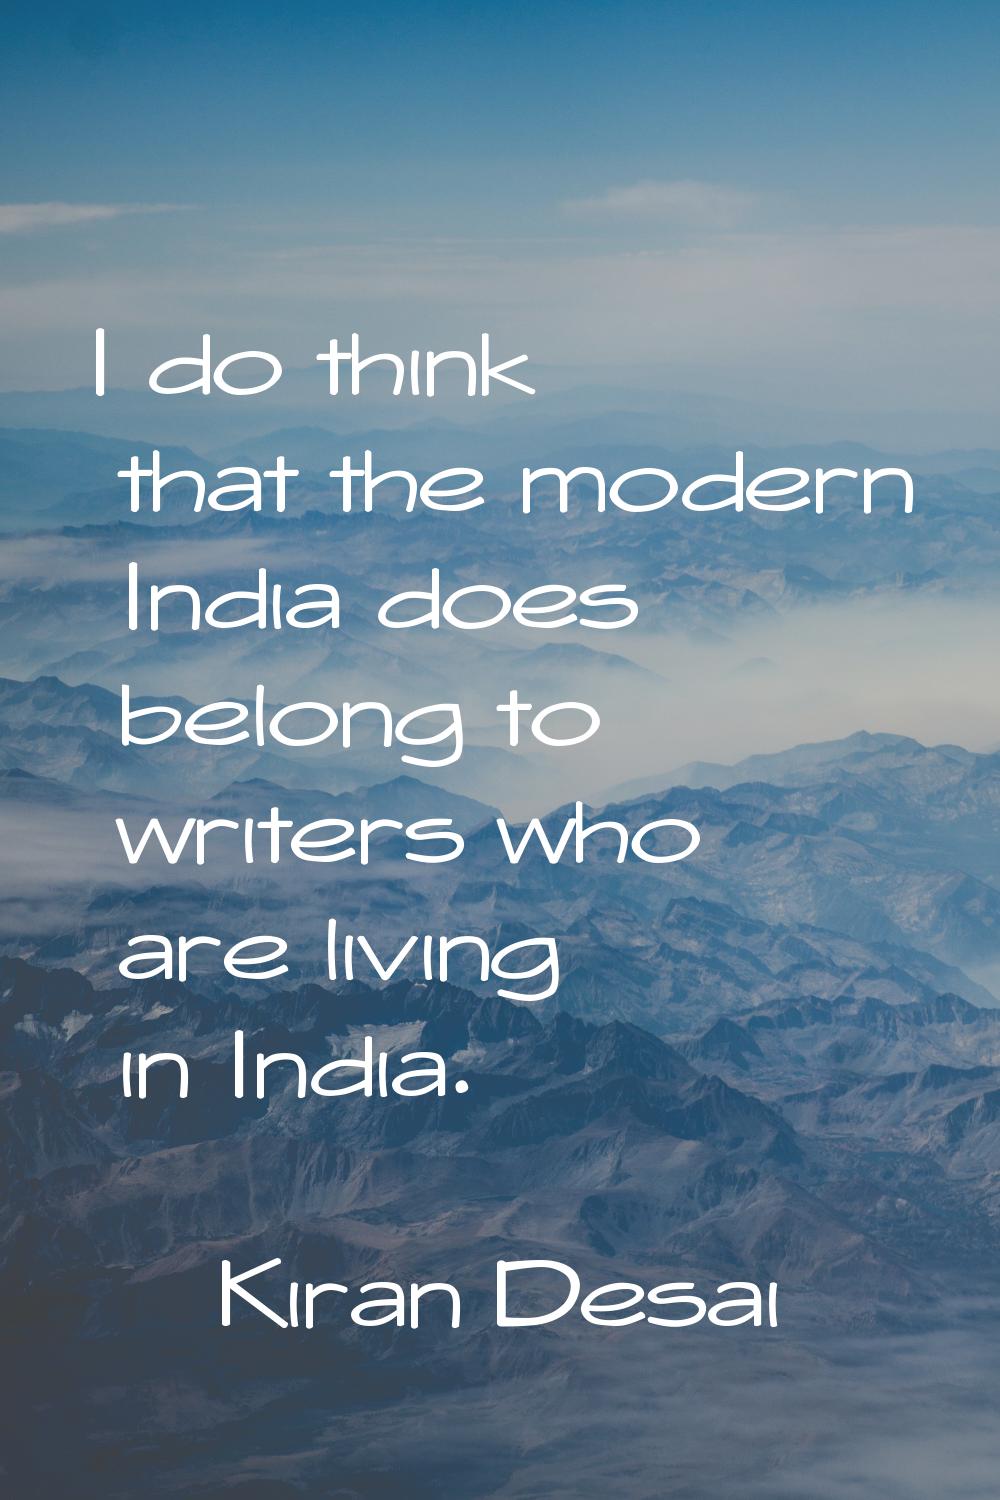 I do think that the modern India does belong to writers who are living in India.